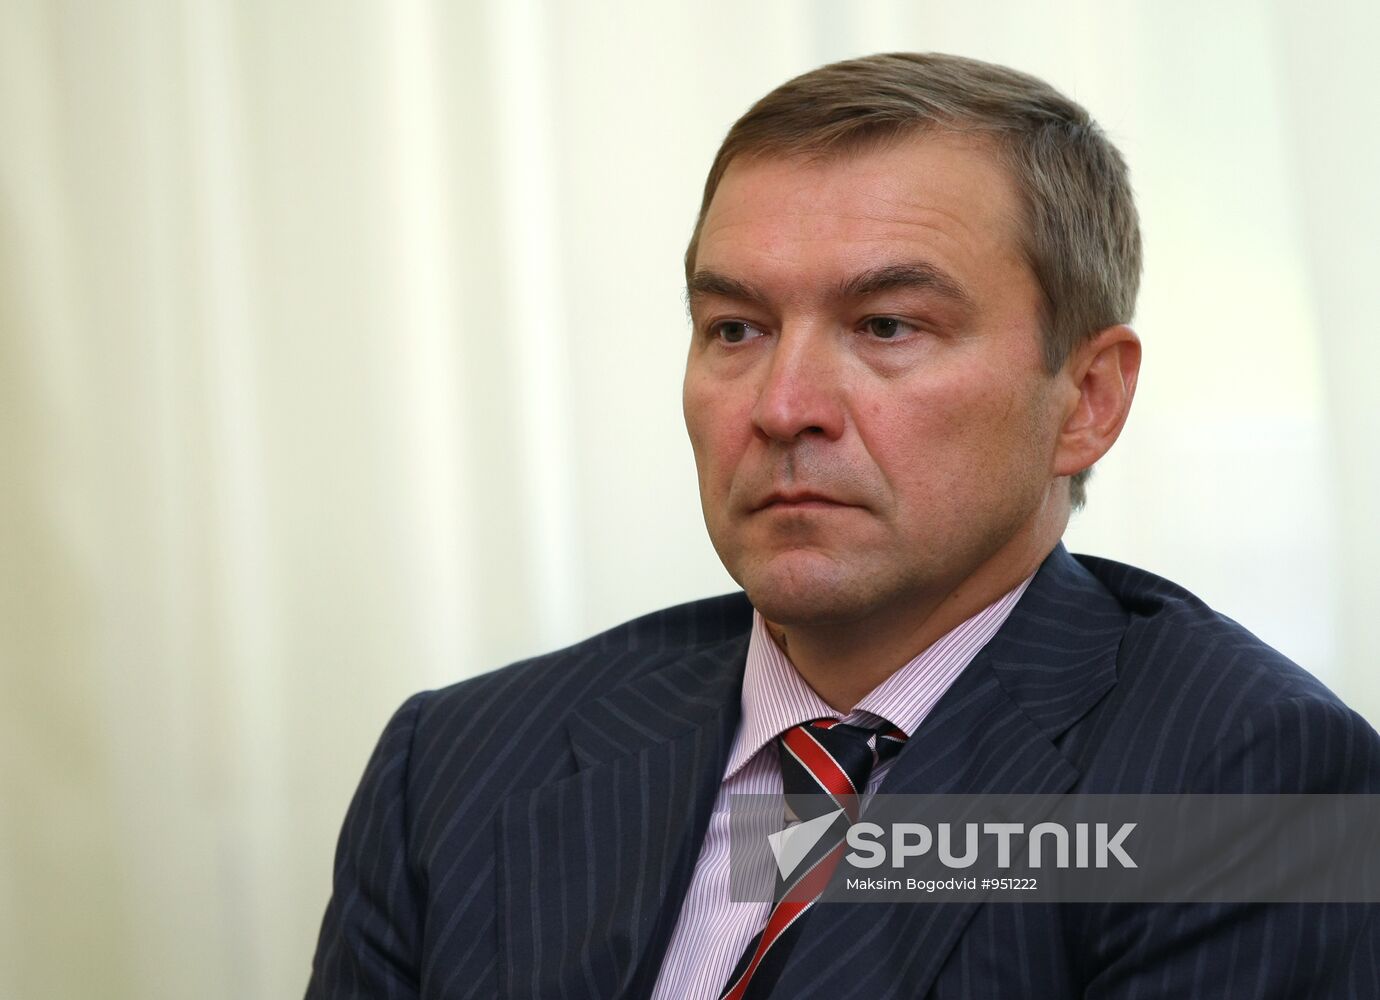 Newly appointed president of FC Rubin gives news conference